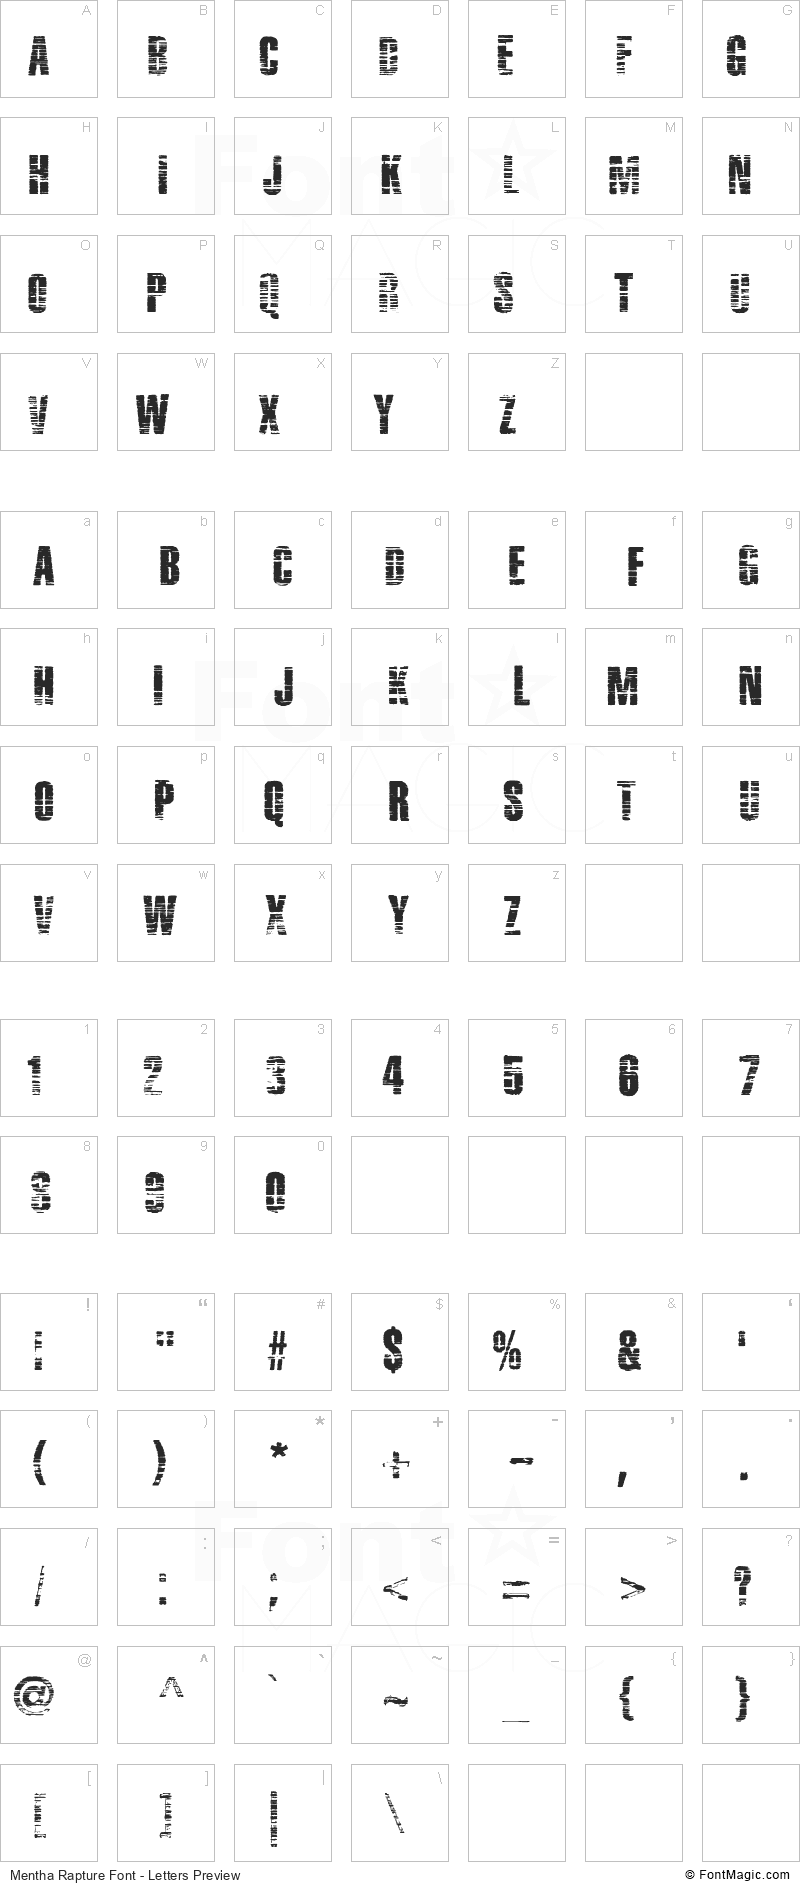 Mentha Rapture Font - All Latters Preview Chart